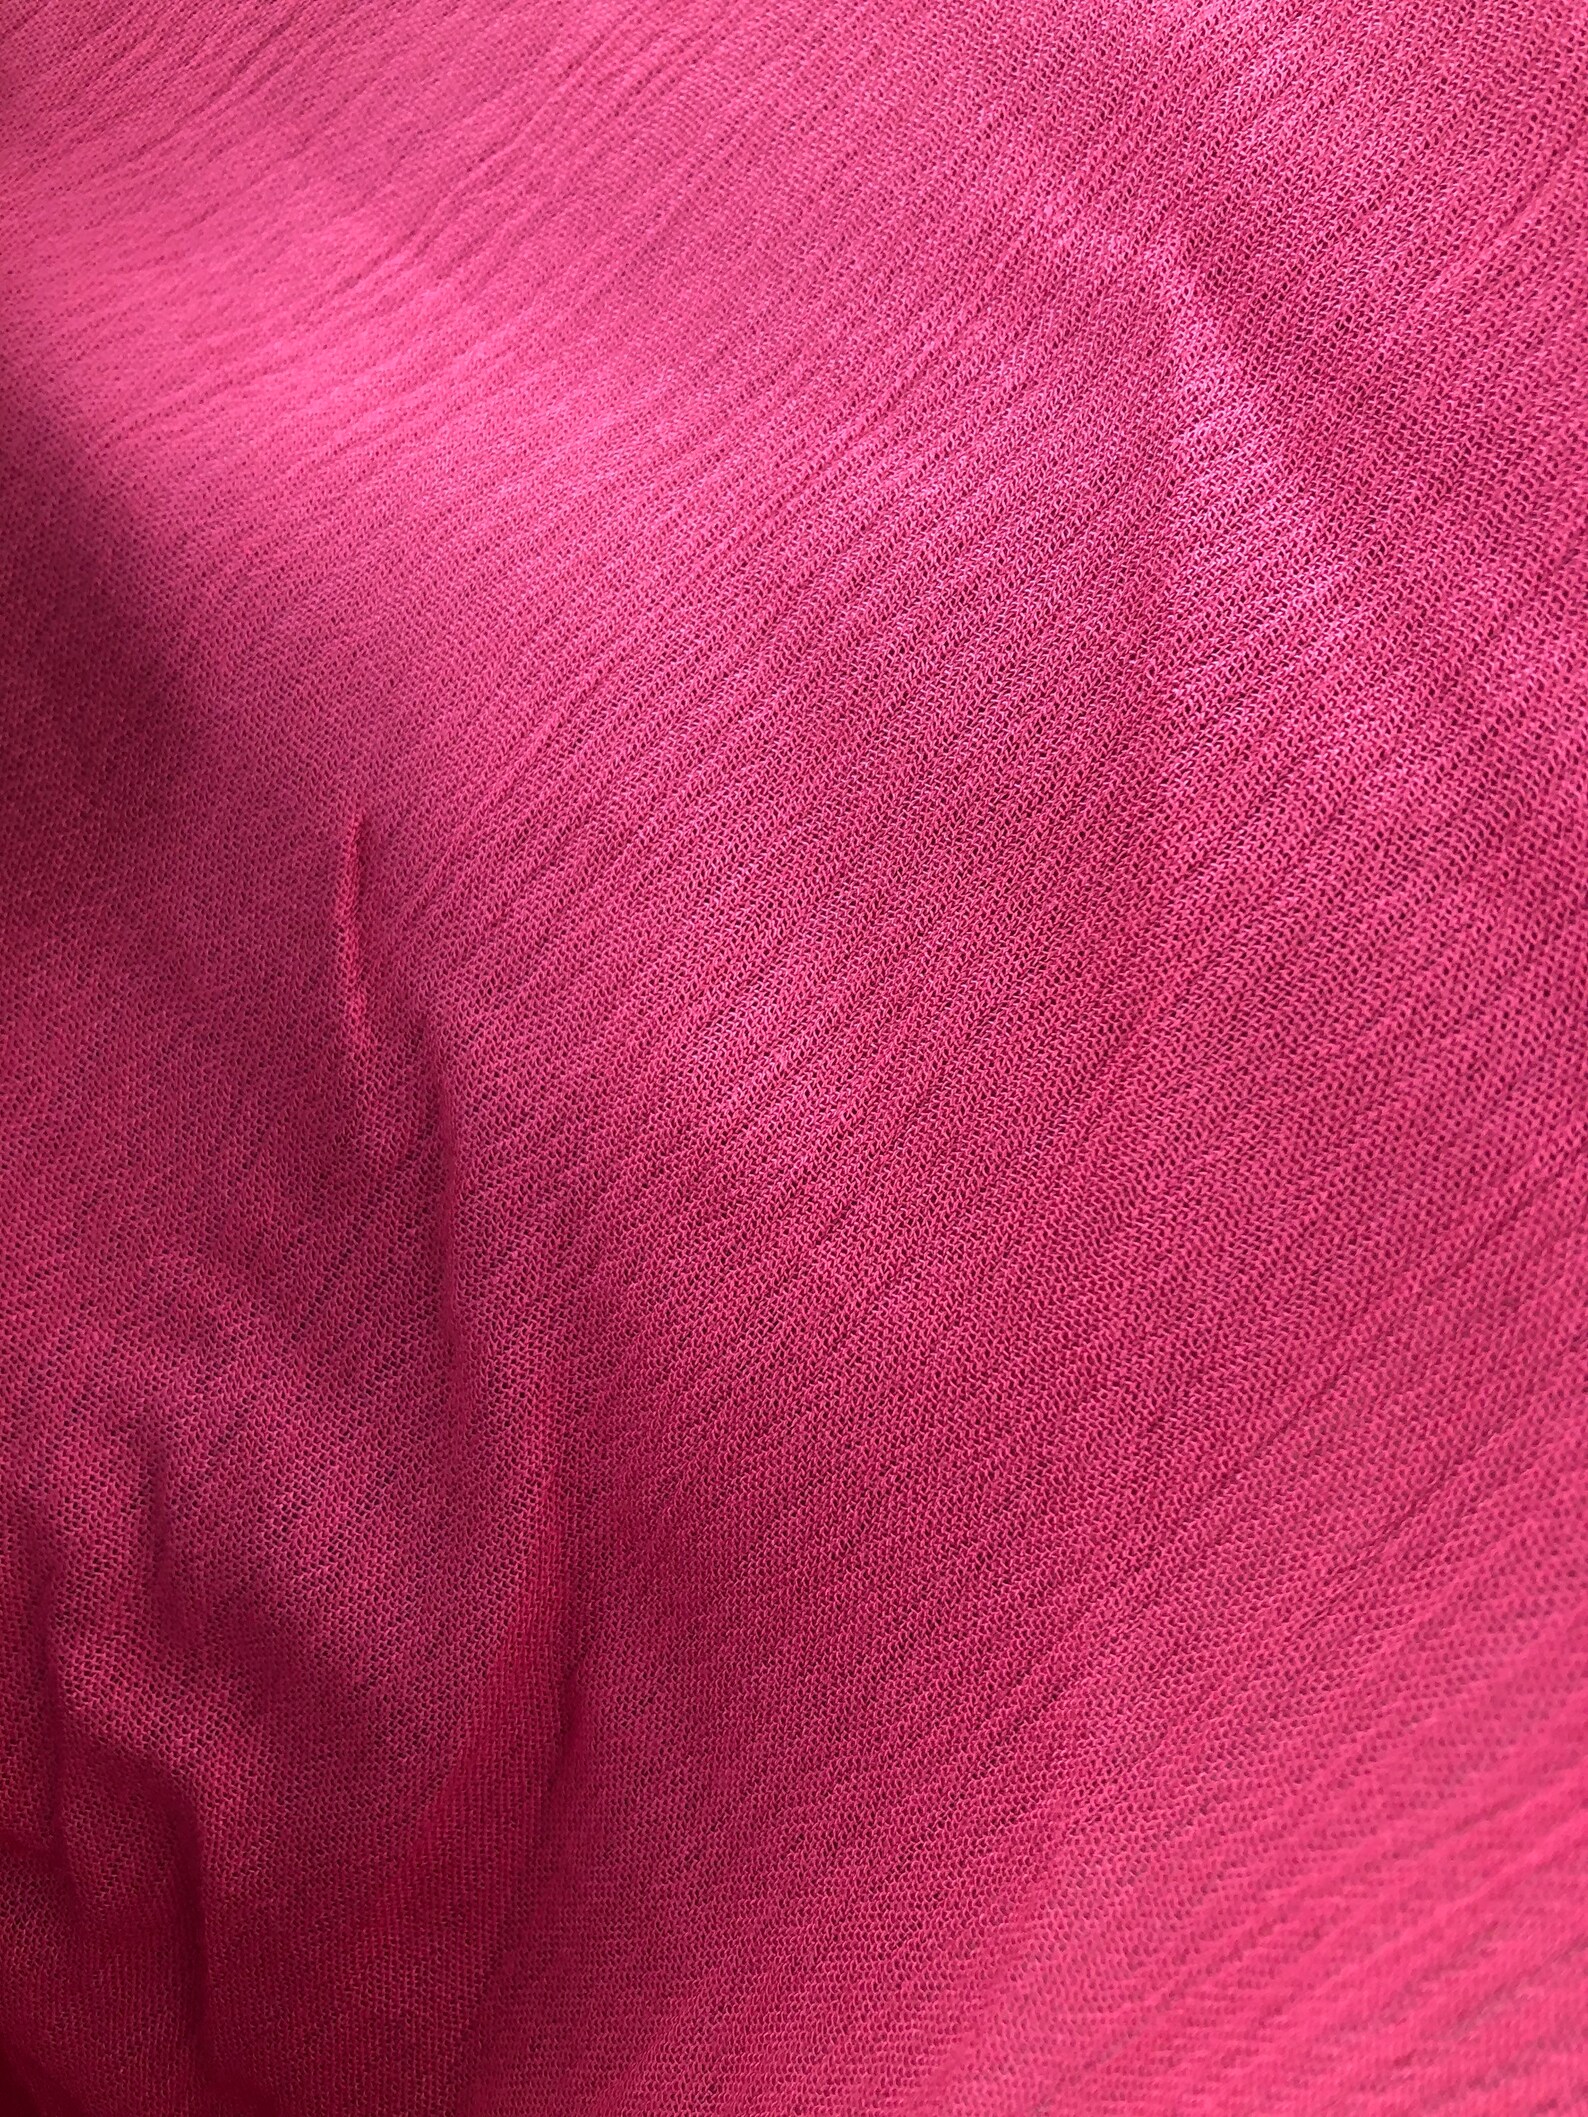 Solid Crinkle Rayon fabric by the yard / Rayon Fabric / | Etsy